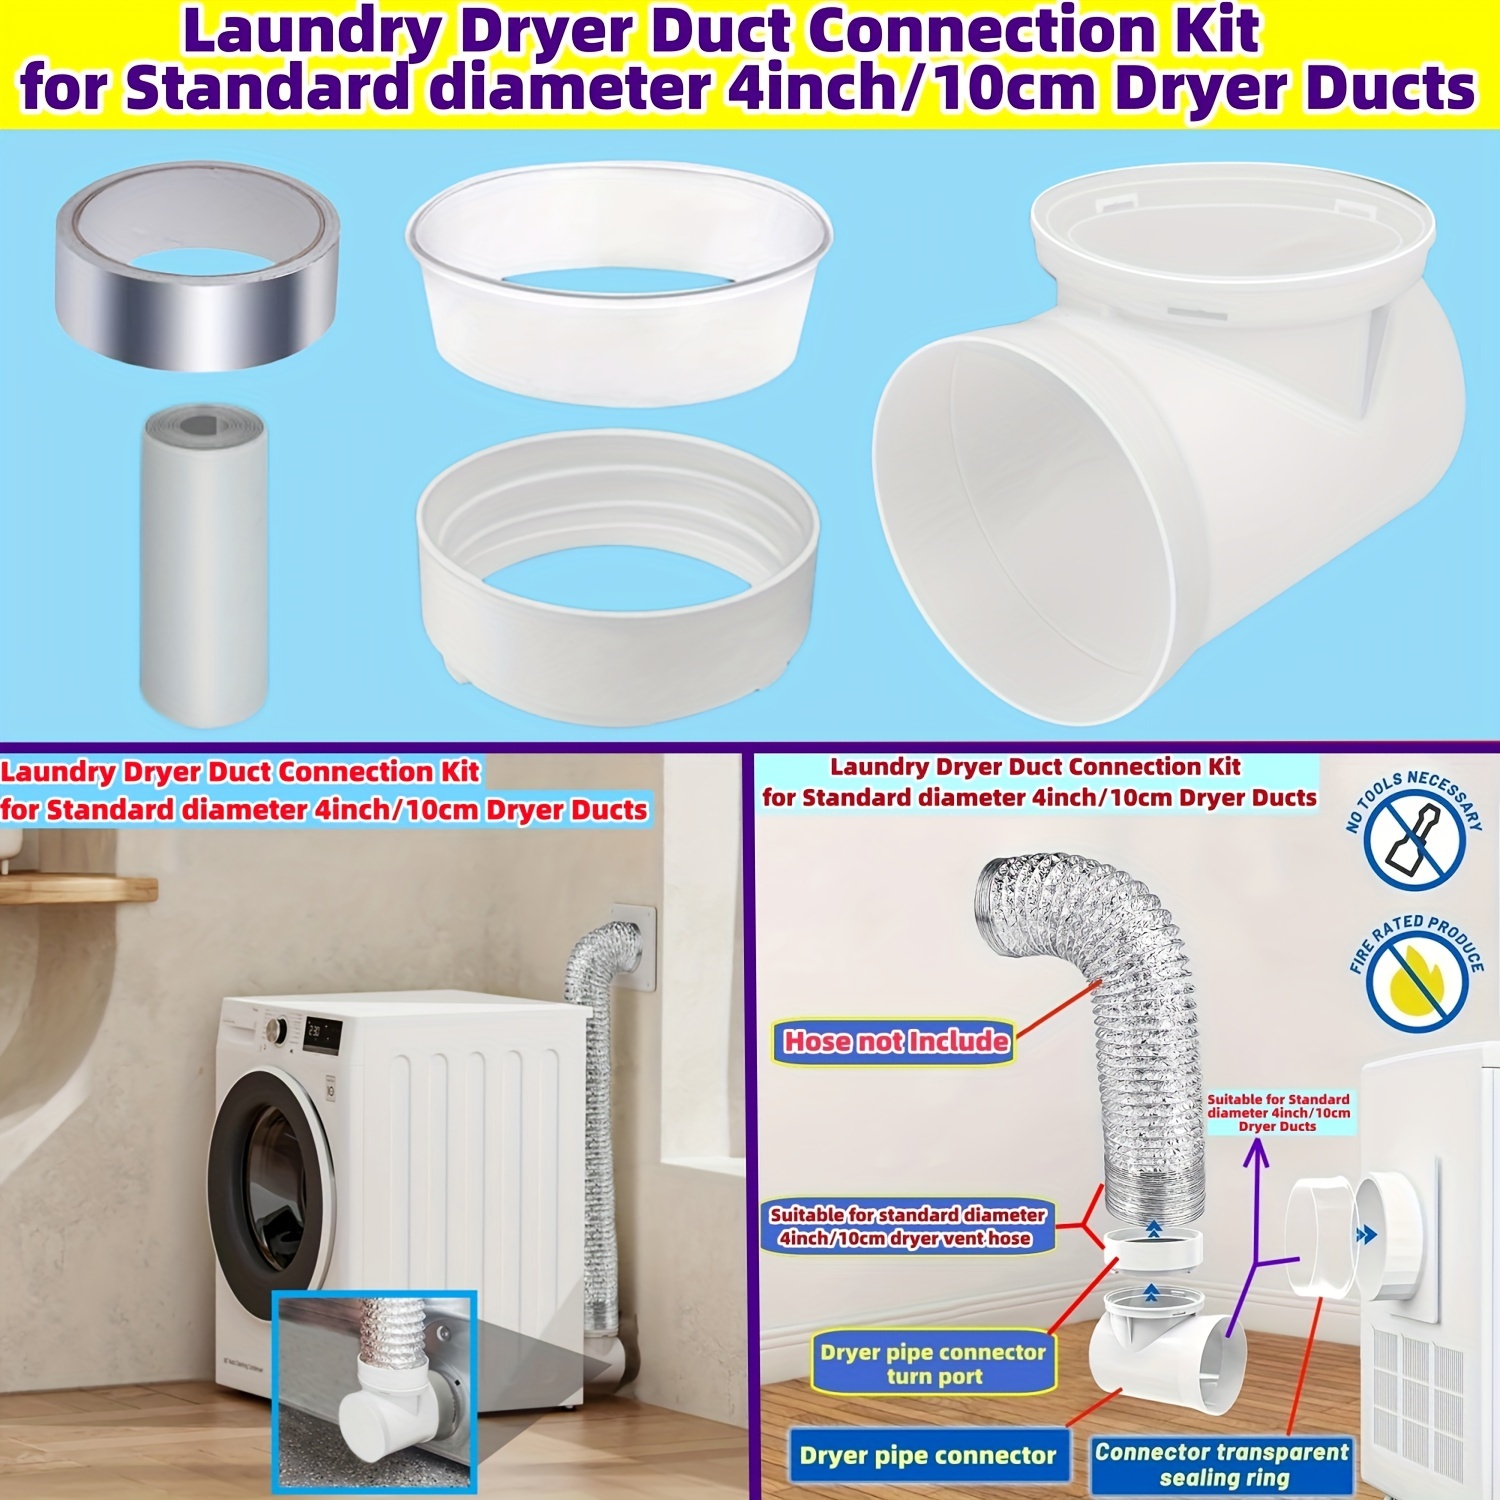 

Premium 4-inch Dryer Vent Kit With Secure Mounting Bracket & Stv-90 Connector - Easy Installation For Standard Laundry Ducts